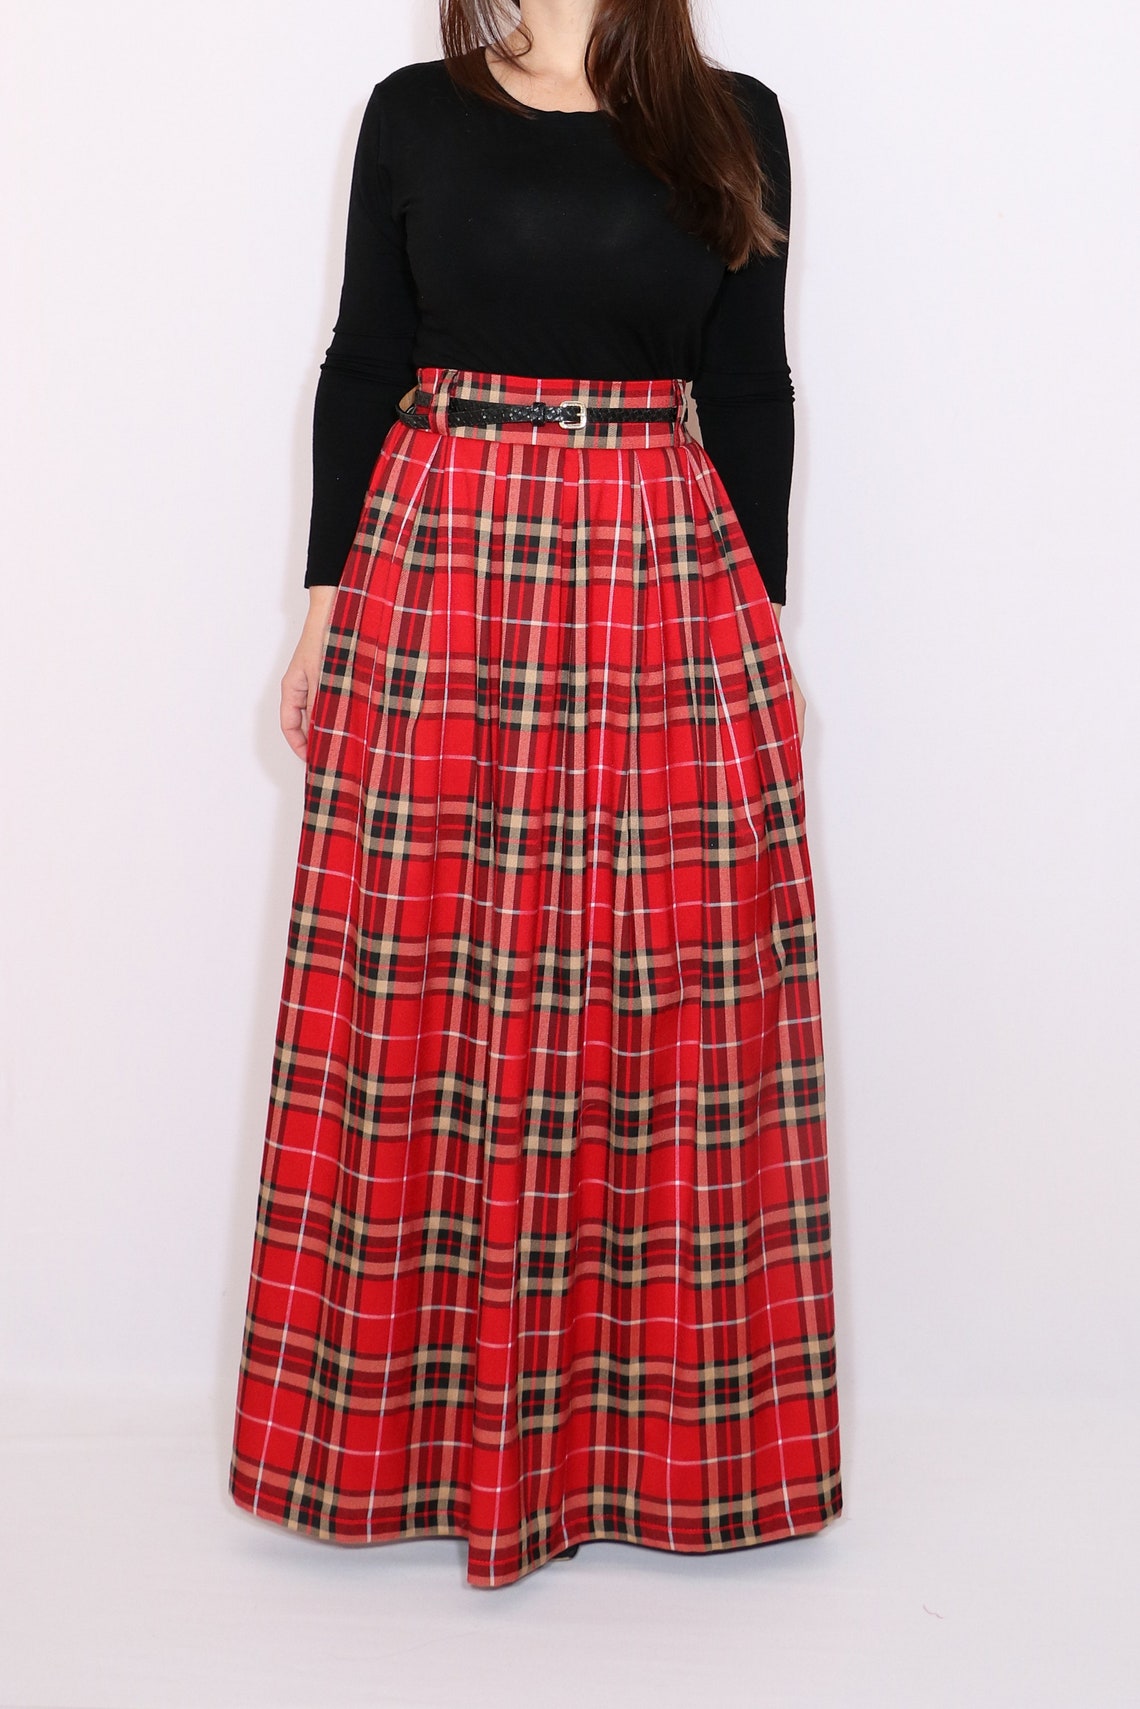 Red Long Plaid Skirt With Pockets Red Tartan Skirt Red Maxi Etsy